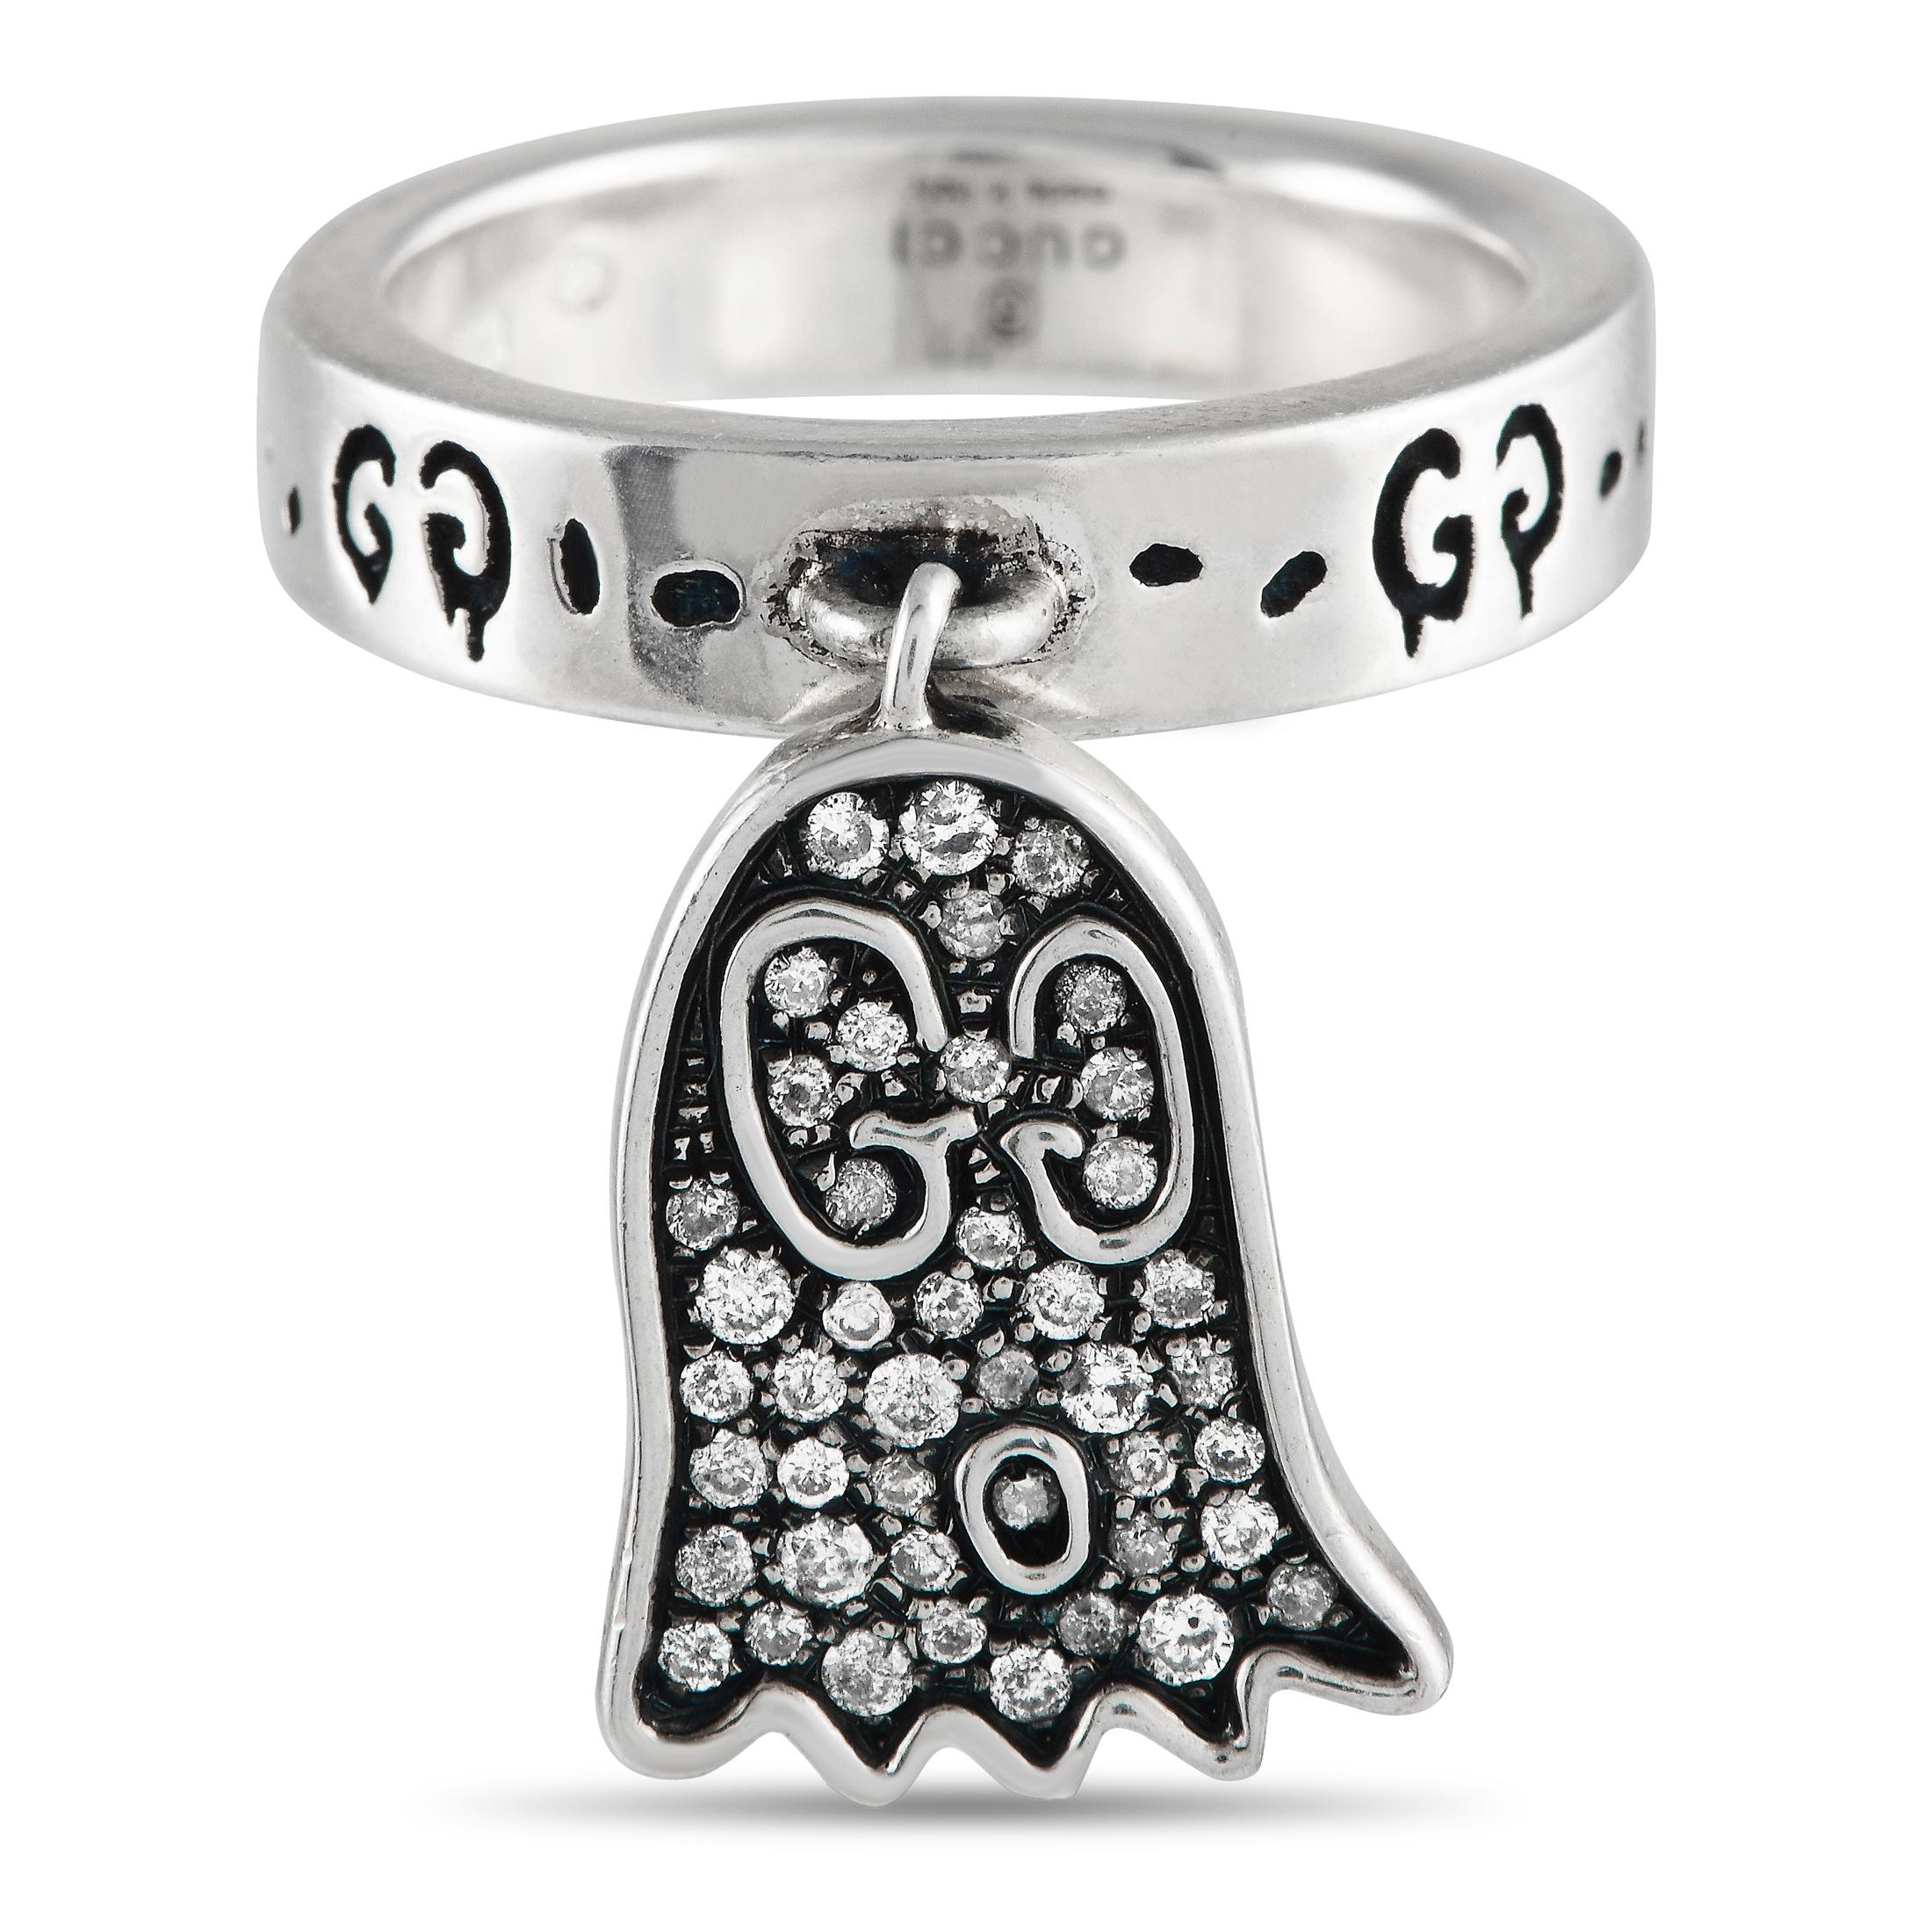 Add a spooky twist to your style with this Gucci ring. Designed in collaboration with Trouble Andrew, this 4mm-thick sterling silver ring has a GG-embossed band adorned with a dangling ghost charm with GG eyes and a Pacman-like silhouette. The